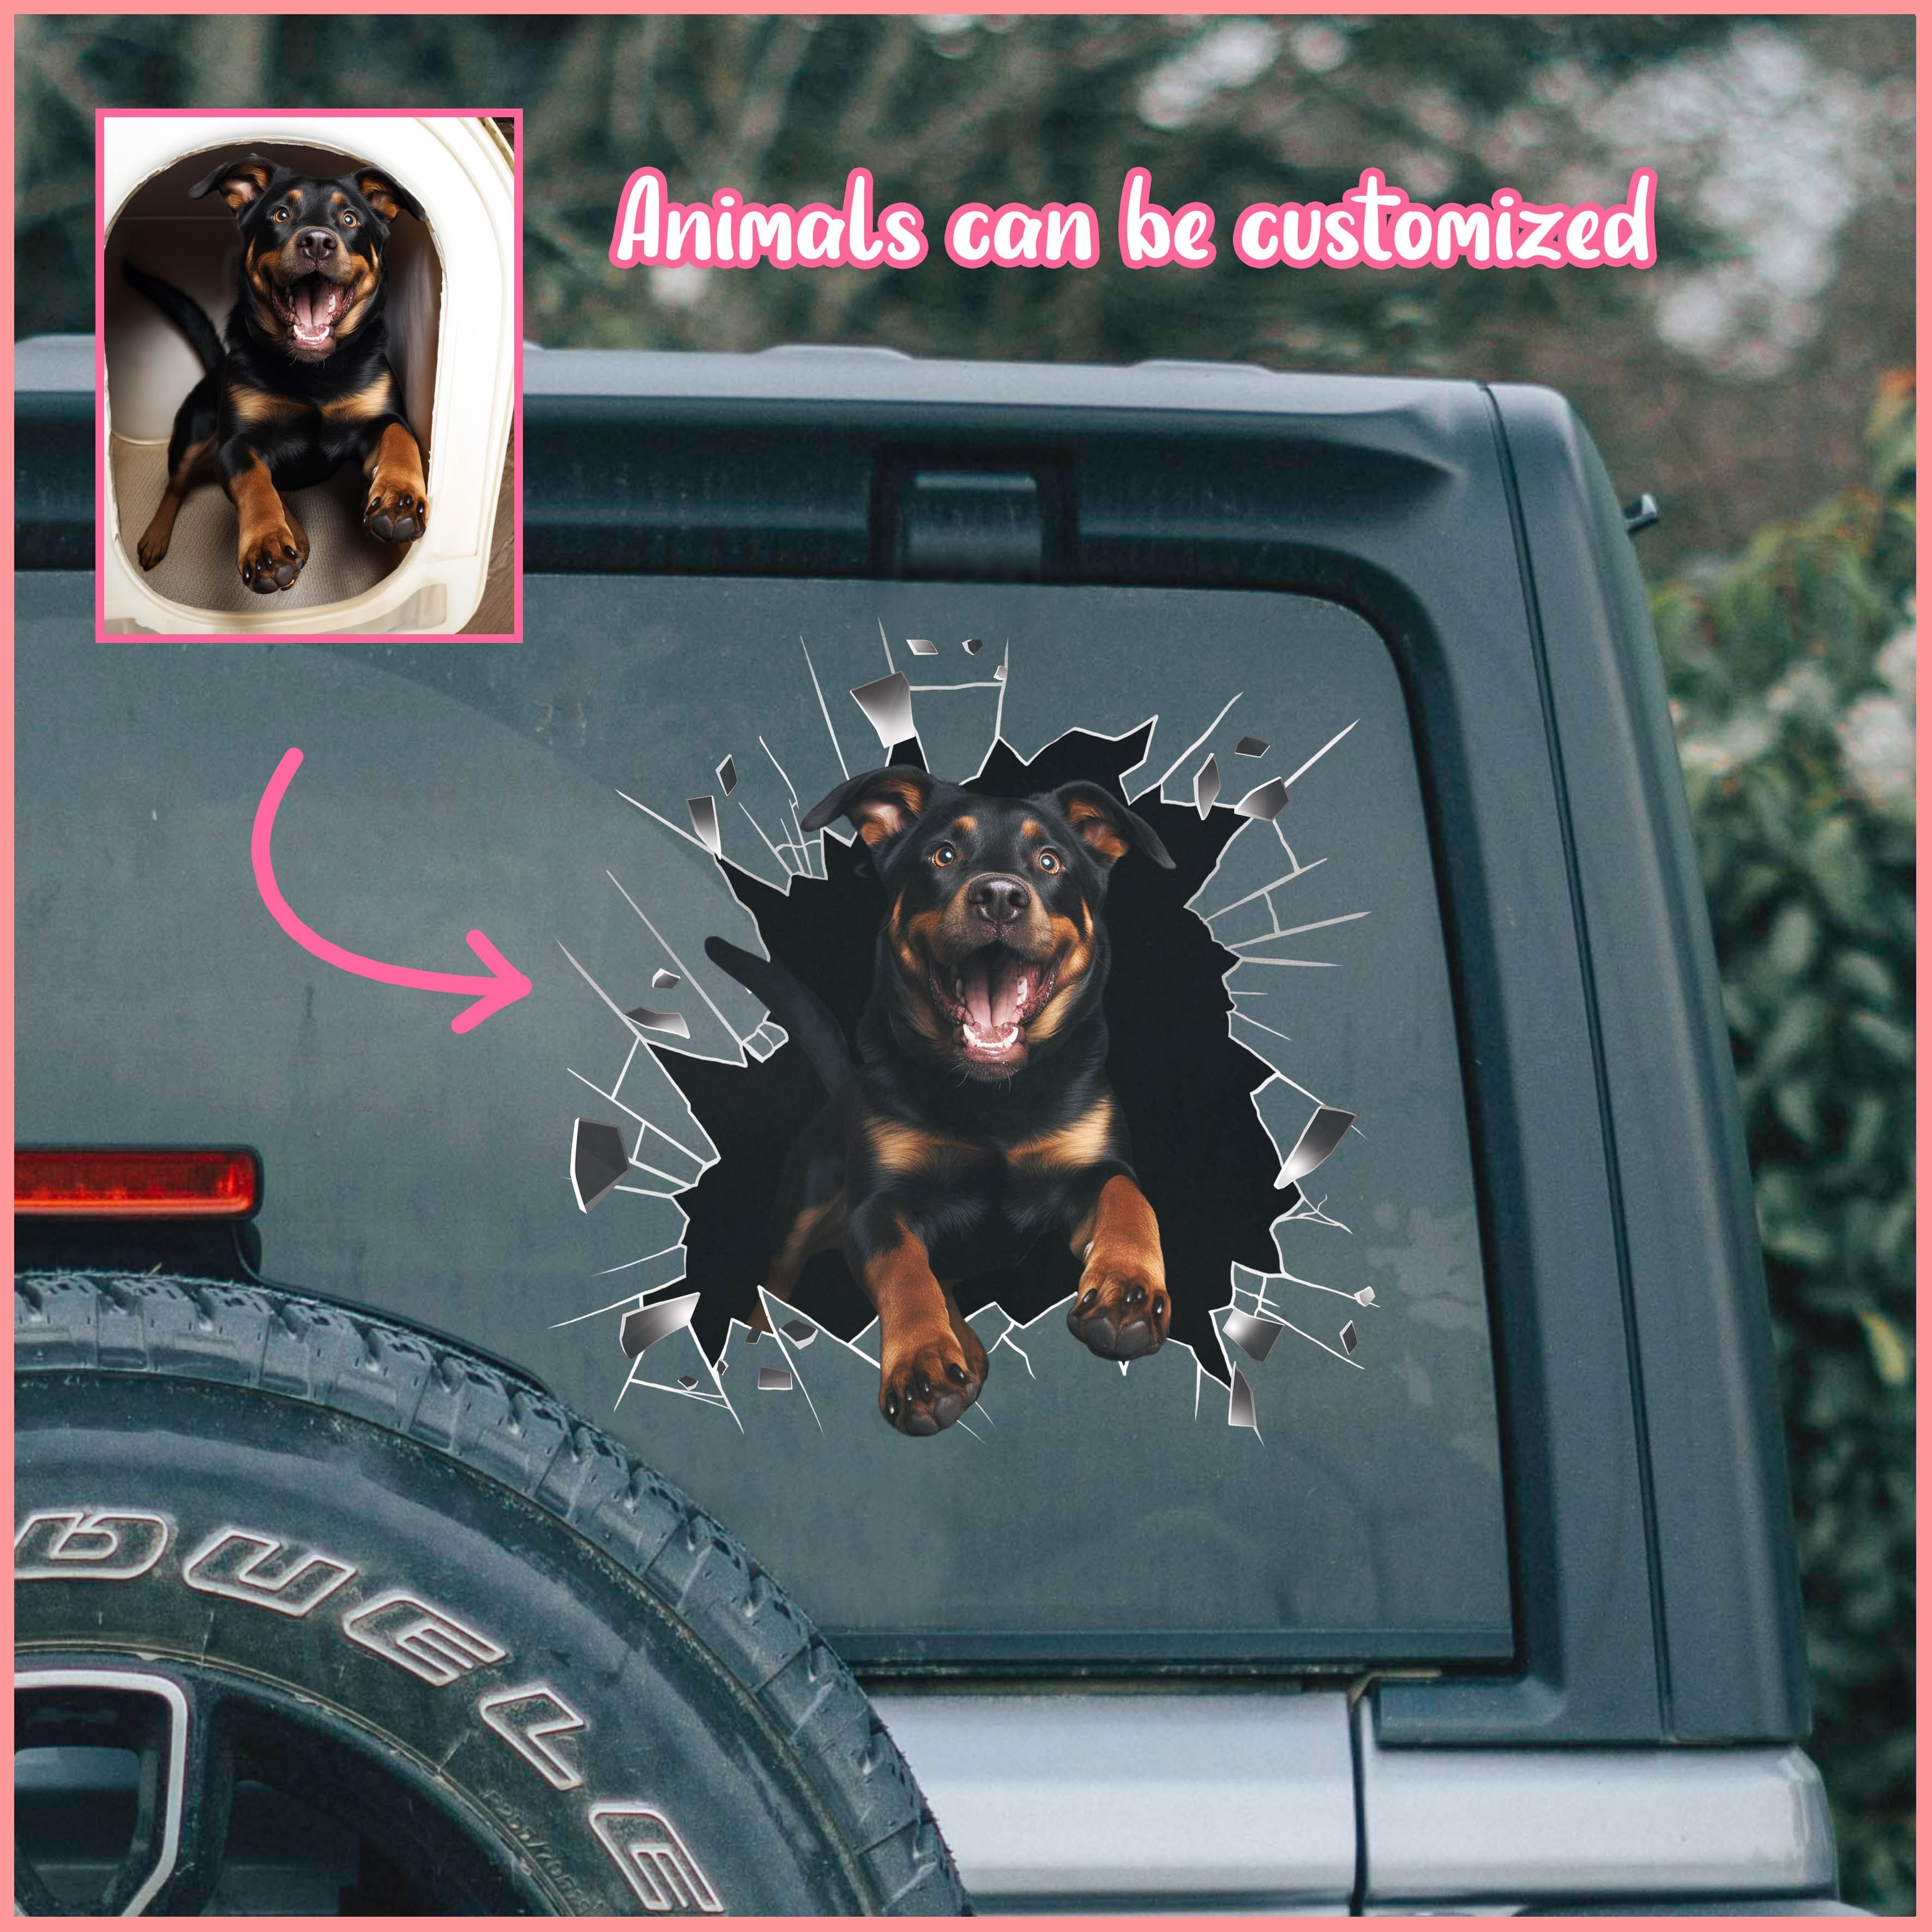 Rottweiler car decal, Animals can be customized